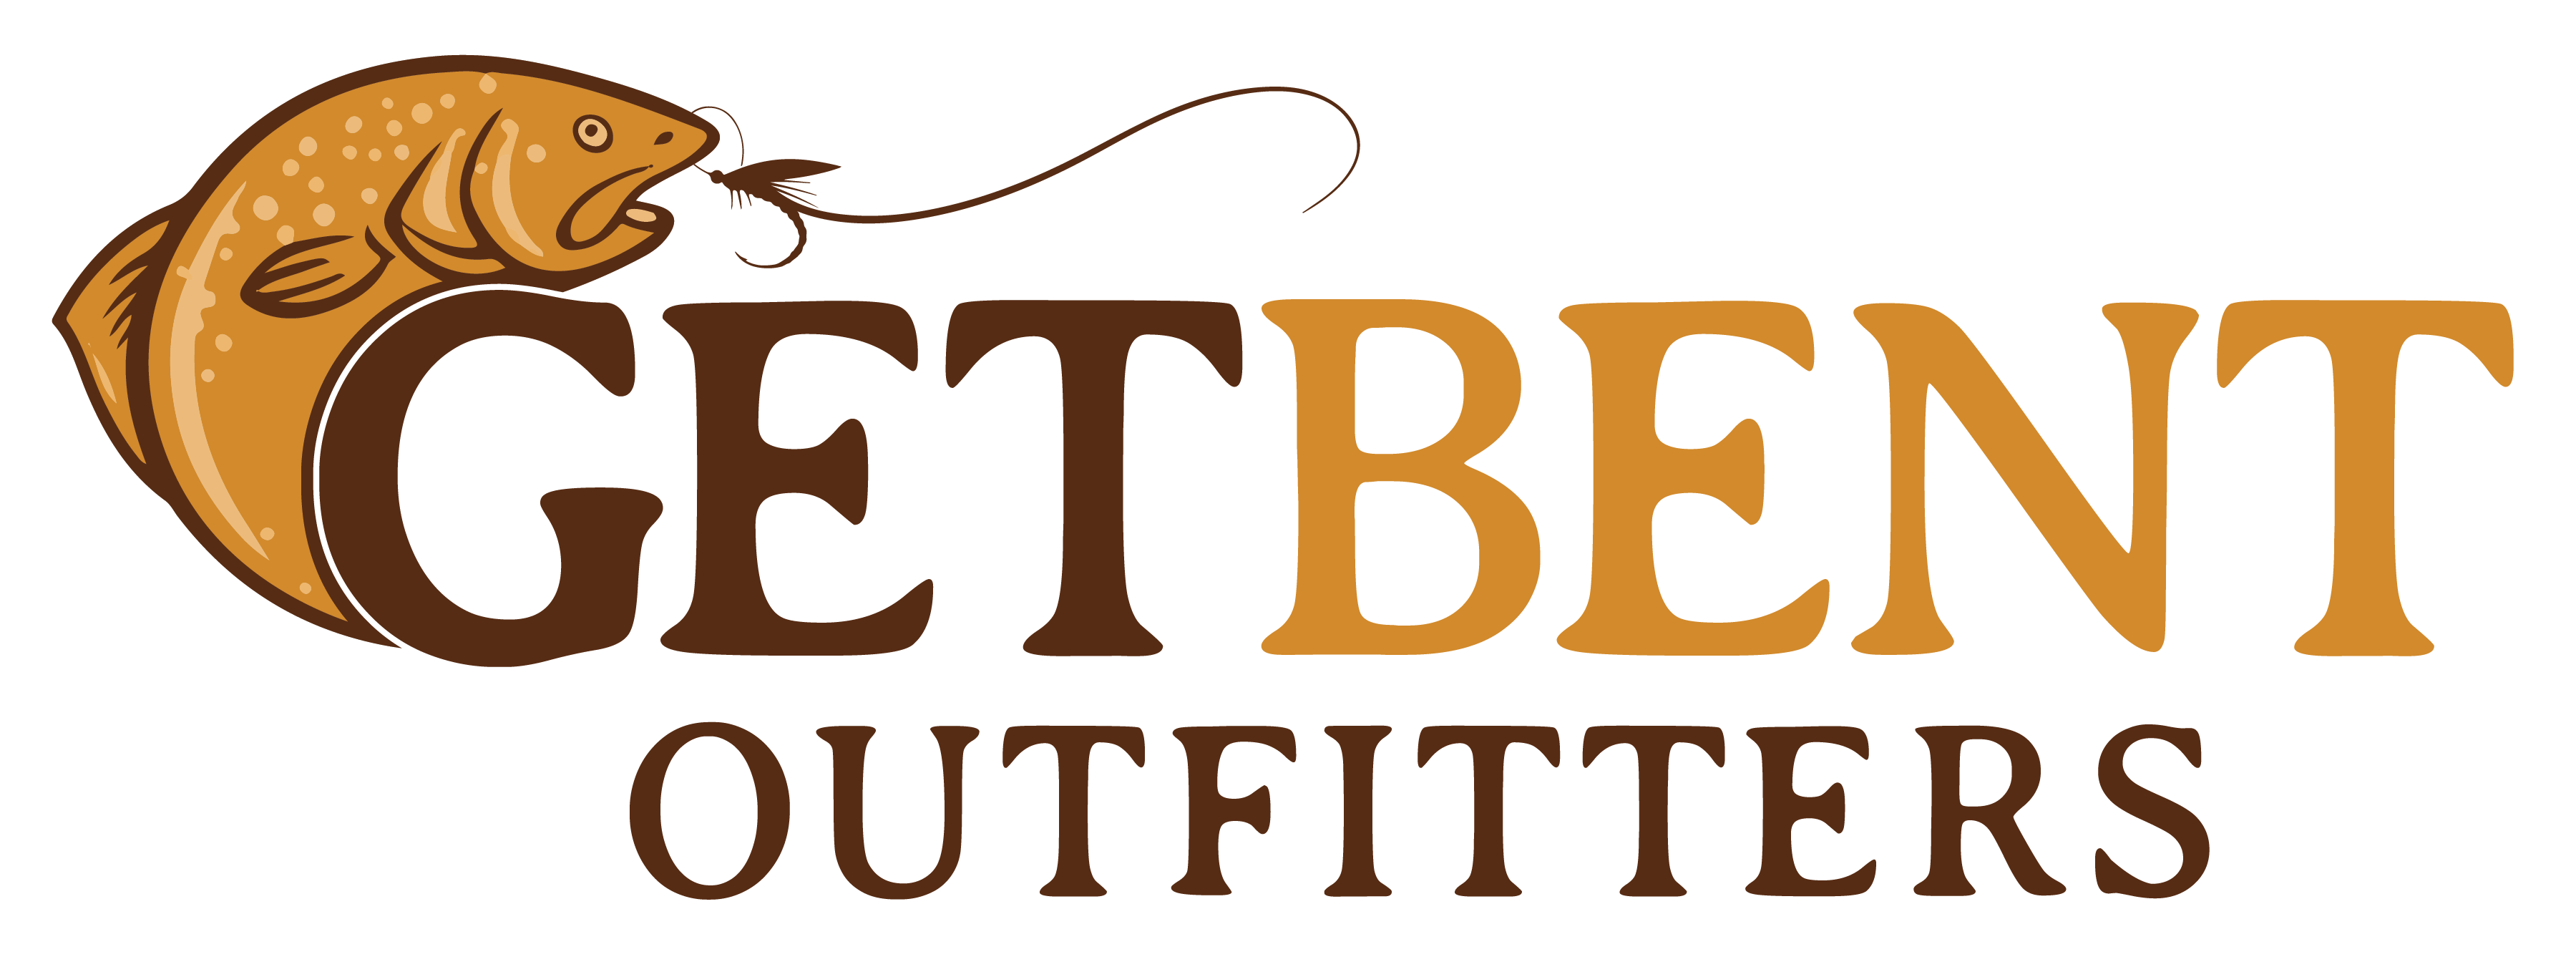 Get Bent Outfitters